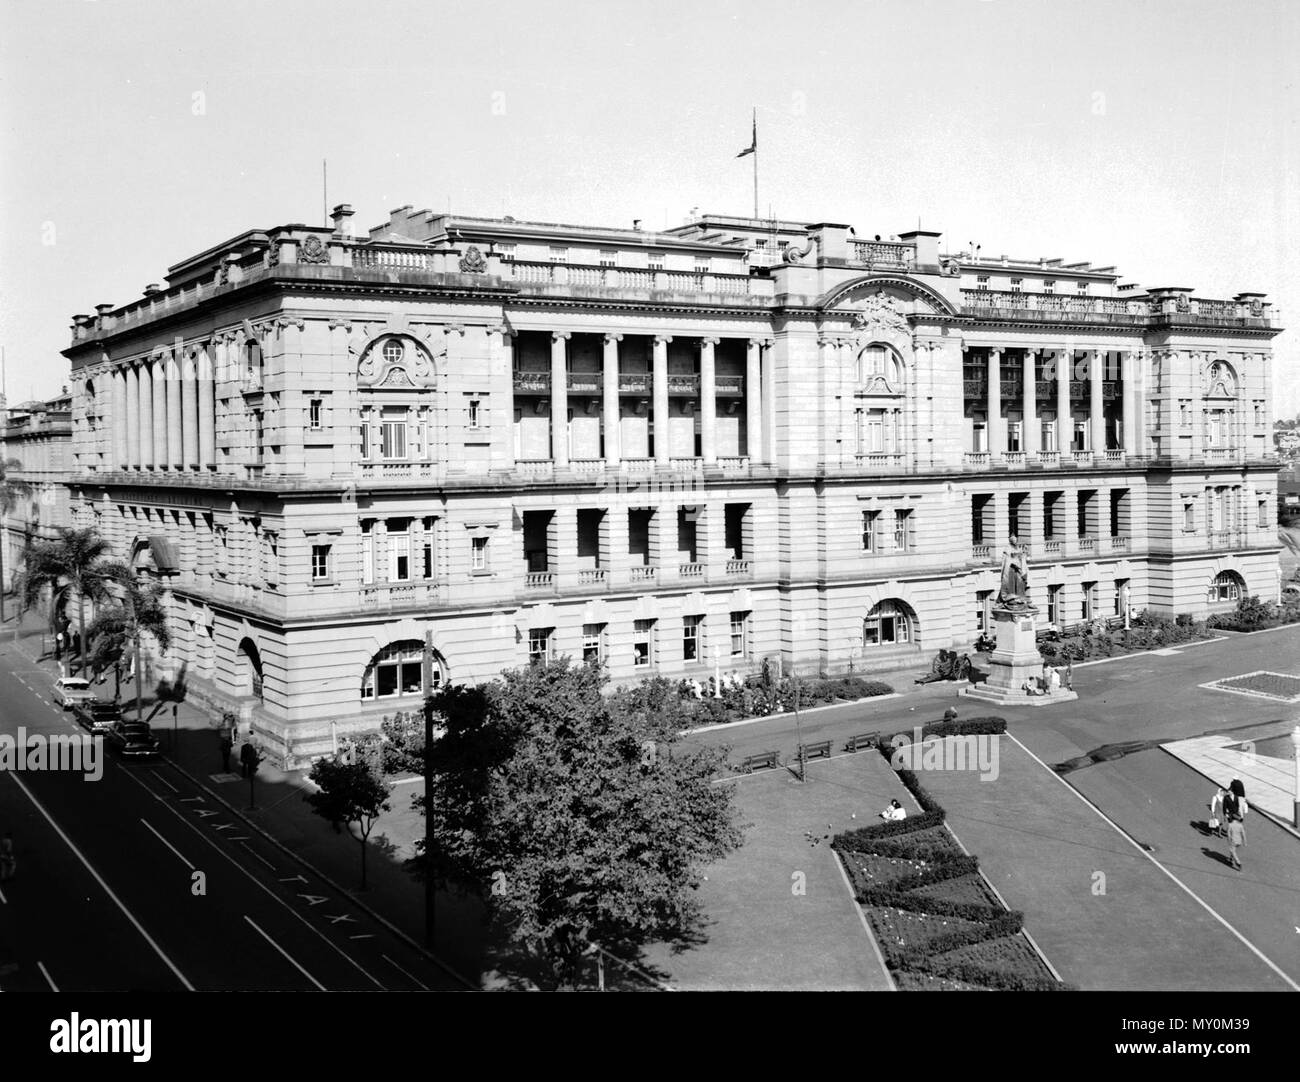 Land Administration Building, Brisbane, 1963. From the Queensland Heritage Registerid=600123 ) .  This four-storeyed masonry government office building was erected between 1901 and 1905. Initially intended as offices for the Lands and Survey Departments, it was finished and occupied in 1905 as the Executive Building, accommodating both the Lands and Survey Departments and offices of the Premier and Executive Council. It is the most prominent Brisbane example of state building activity associated with the economic recovery of the late 1890s, and with the colony's newly federated status.  In 189 Stock Photo